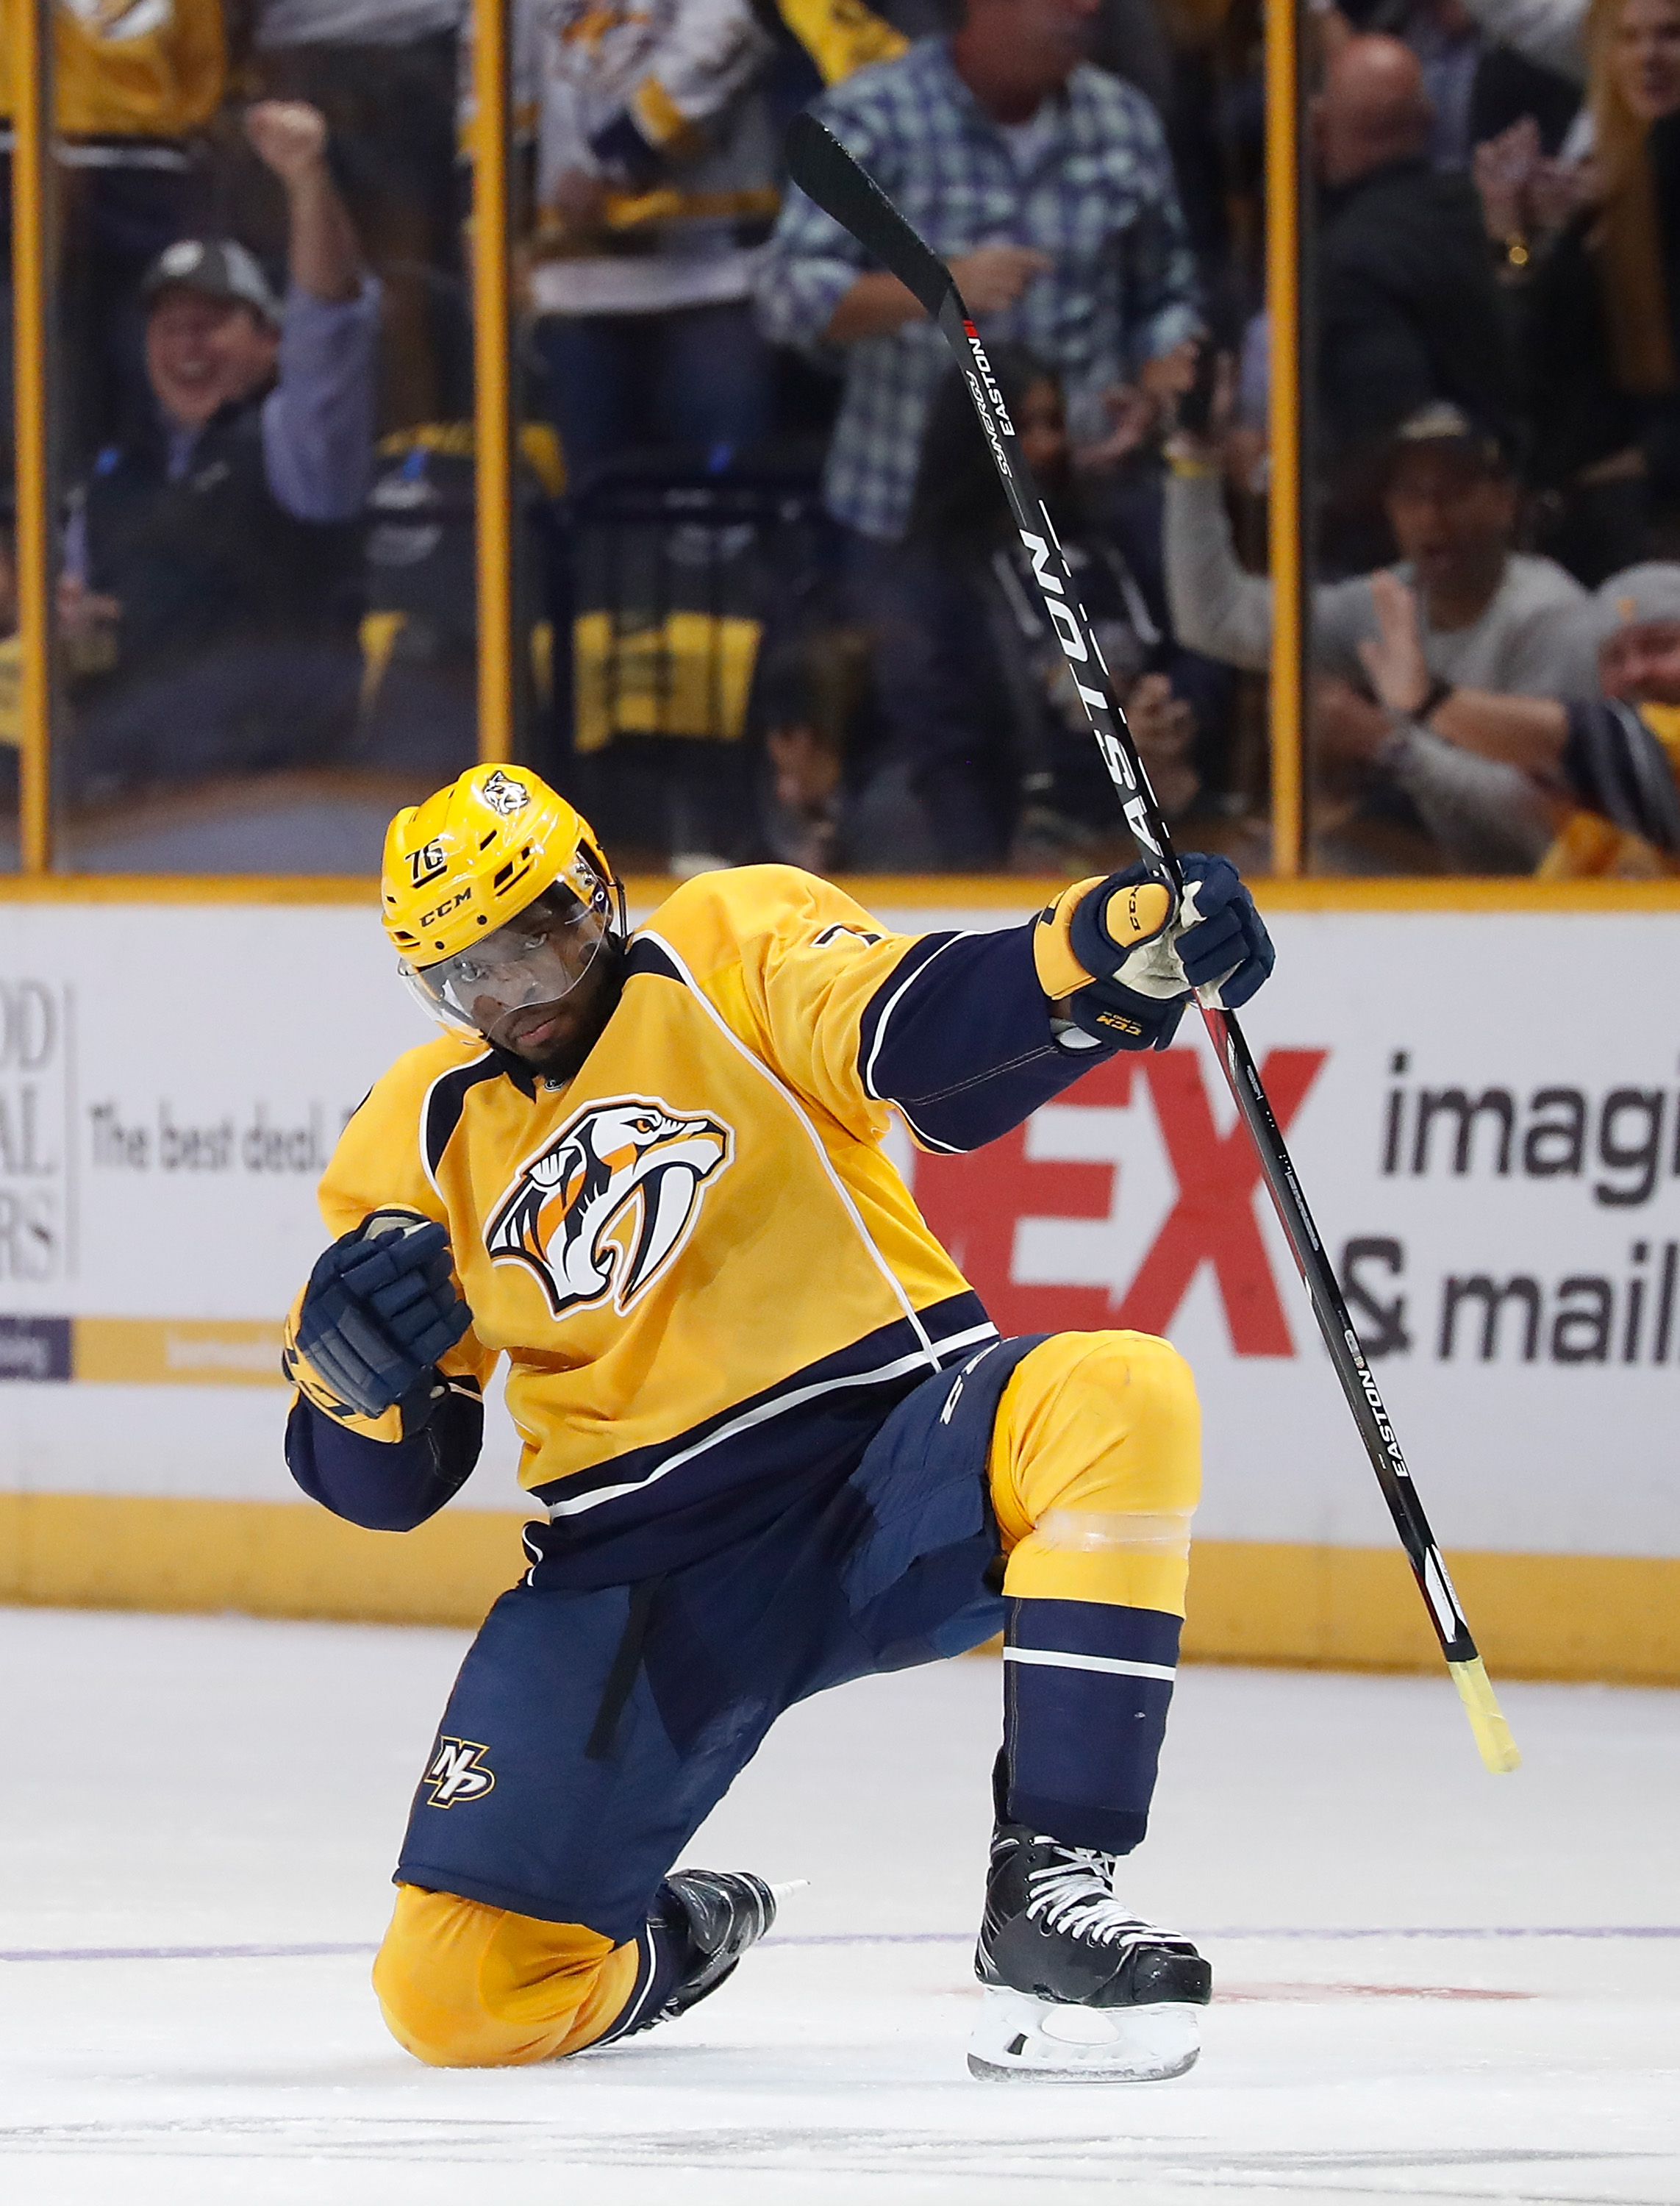 P.K. Subban retires after 13-year NHL career